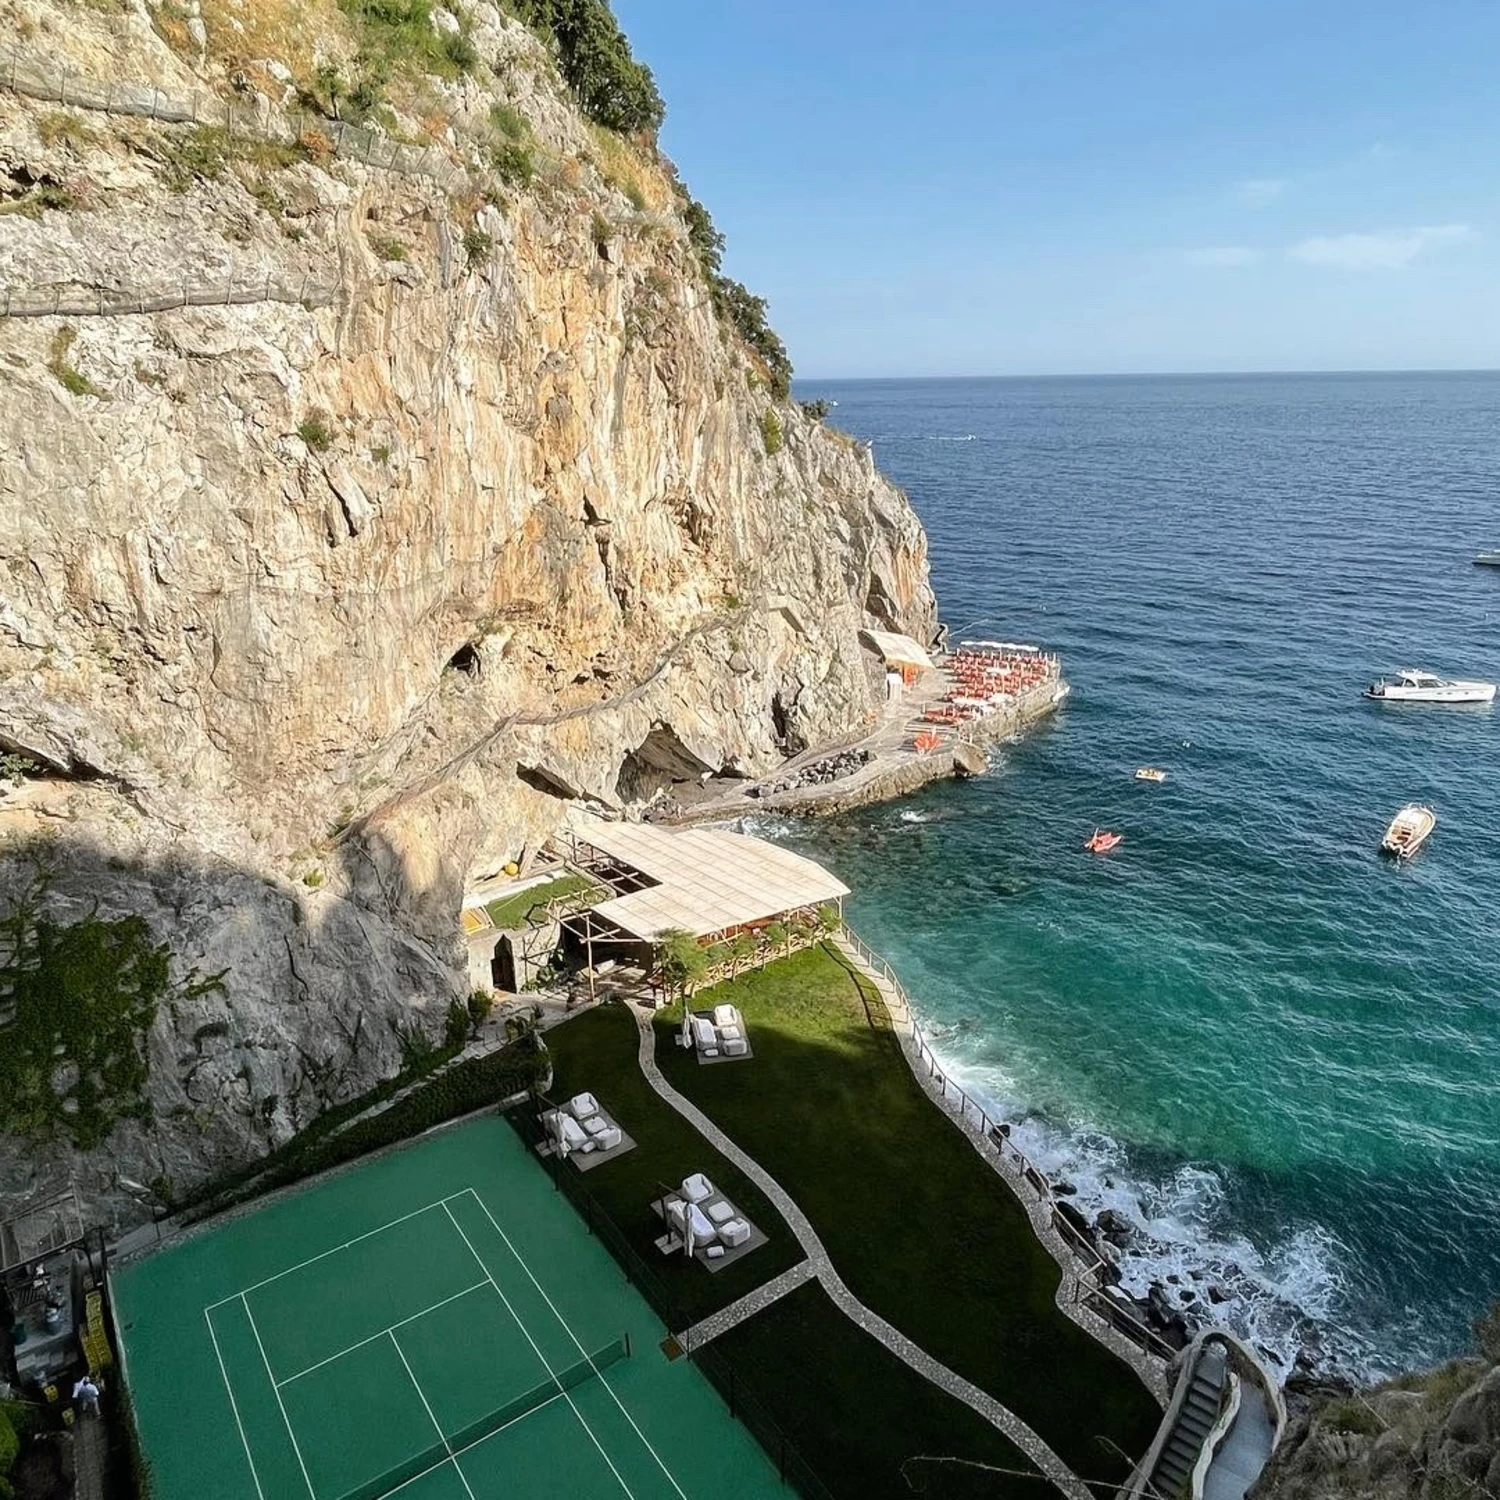 Tennis court and the beach side